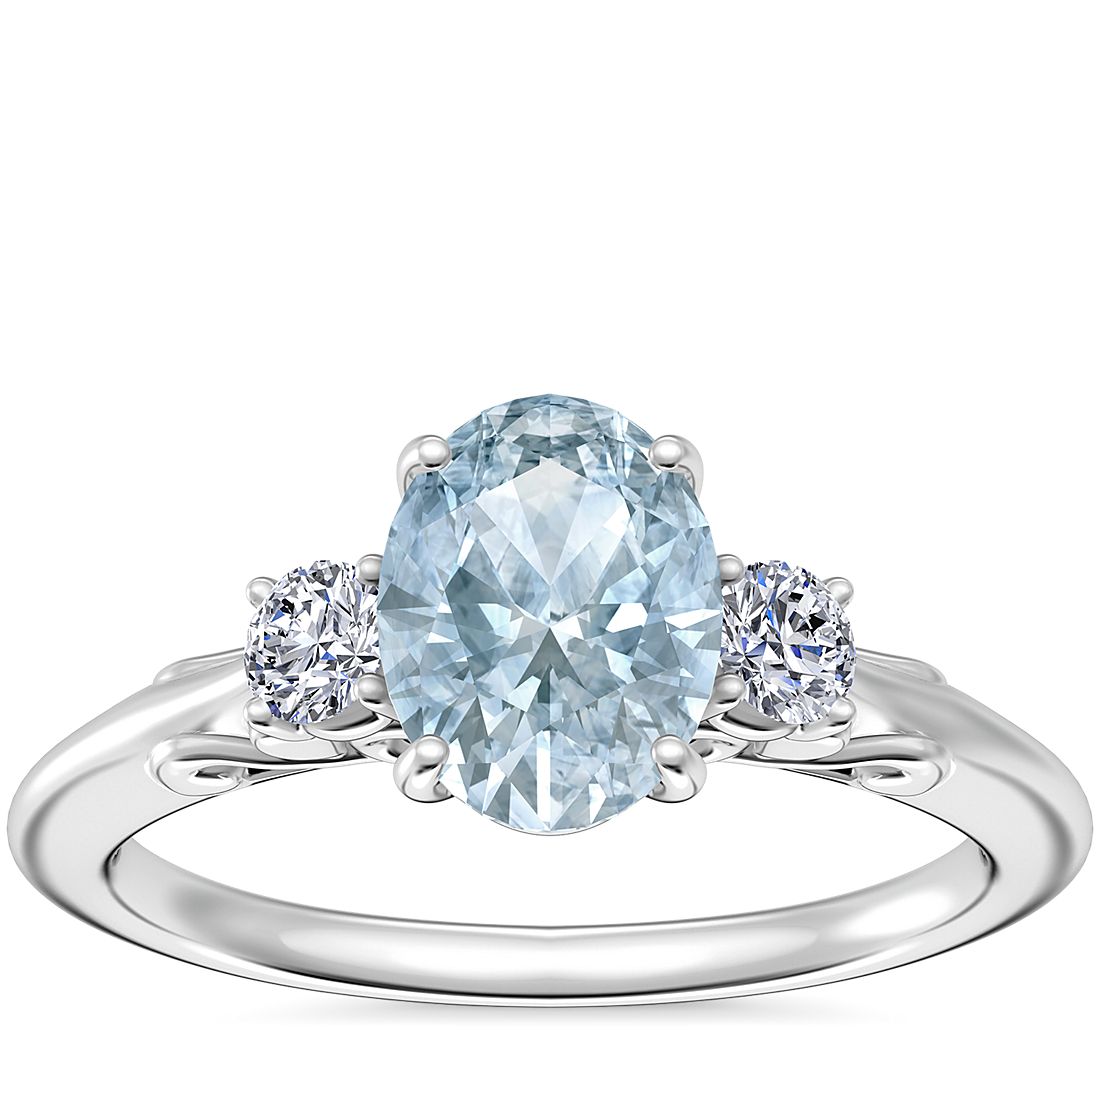 Vintage Three Stone Engagement Ring with Oval Aquamarine in 18k White Gold (8x6mm)